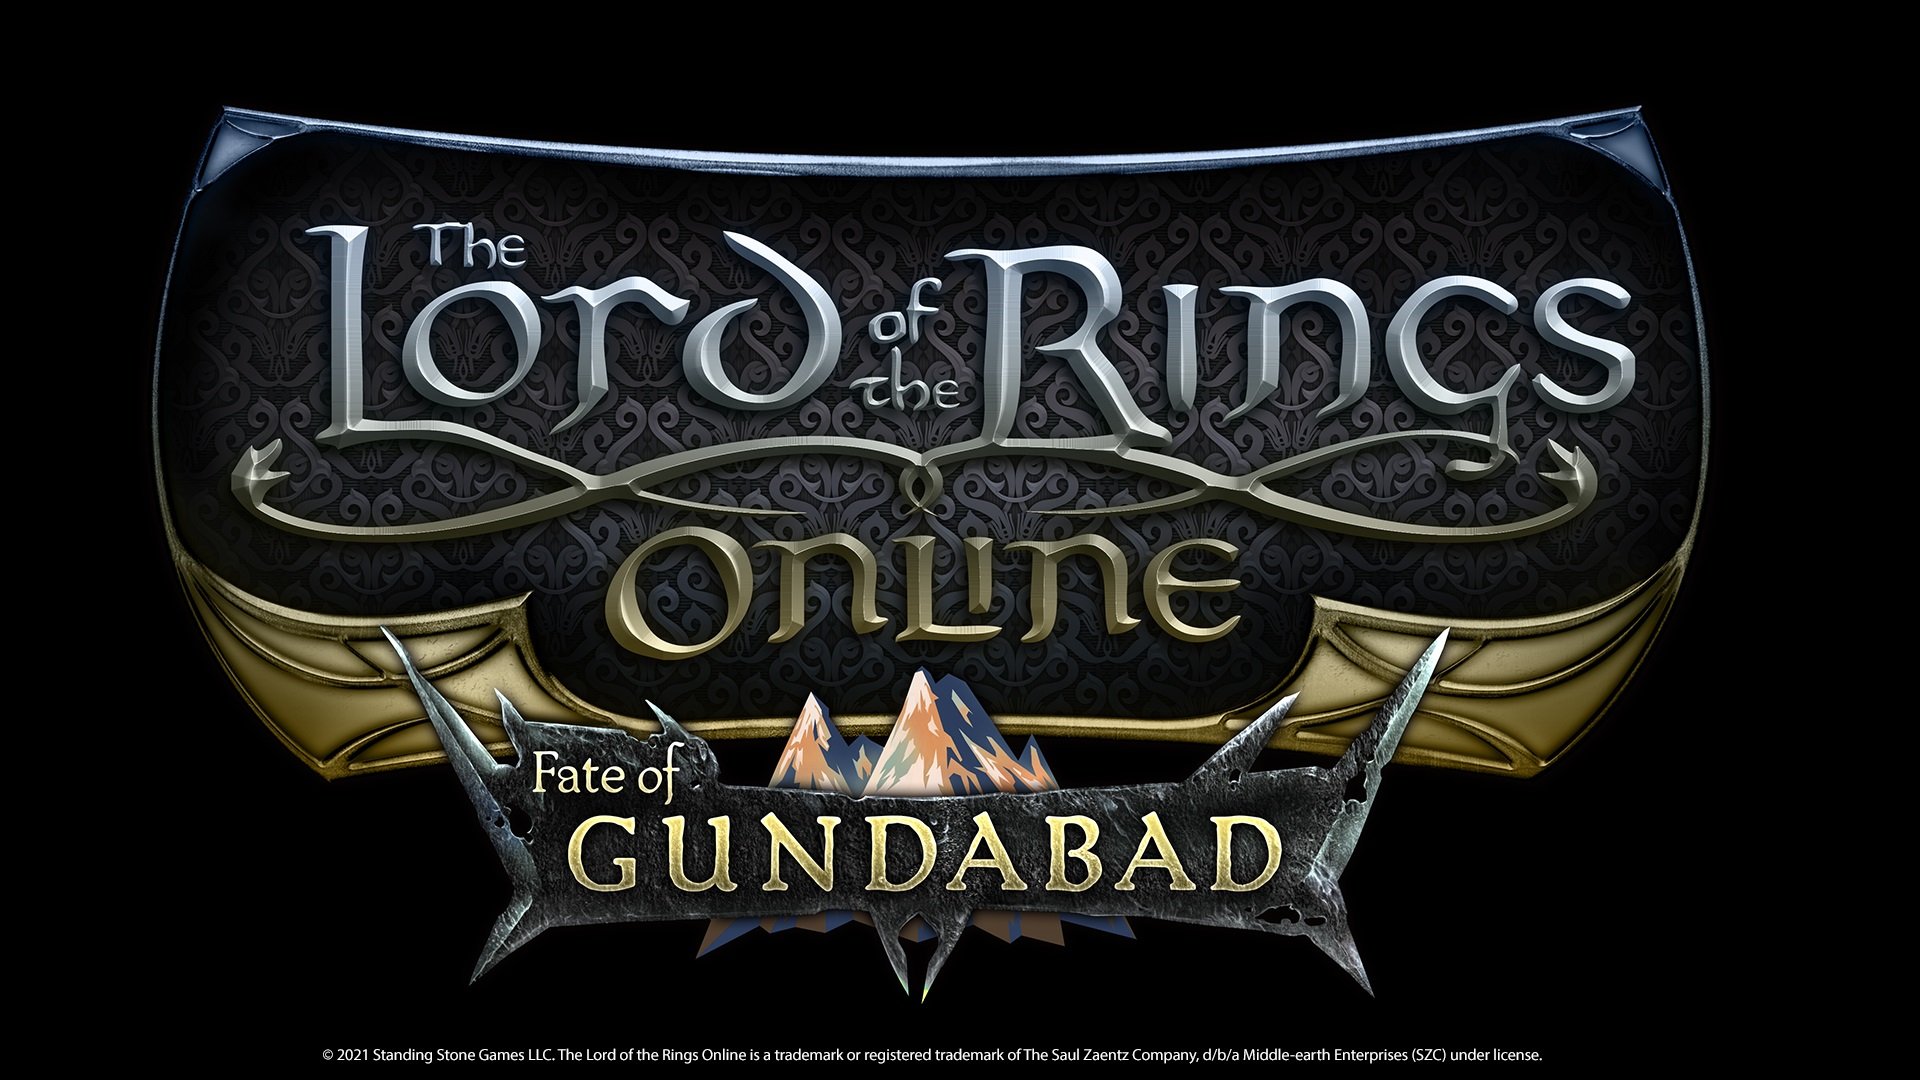 русификатор на the lord of the rings online steam фото 74